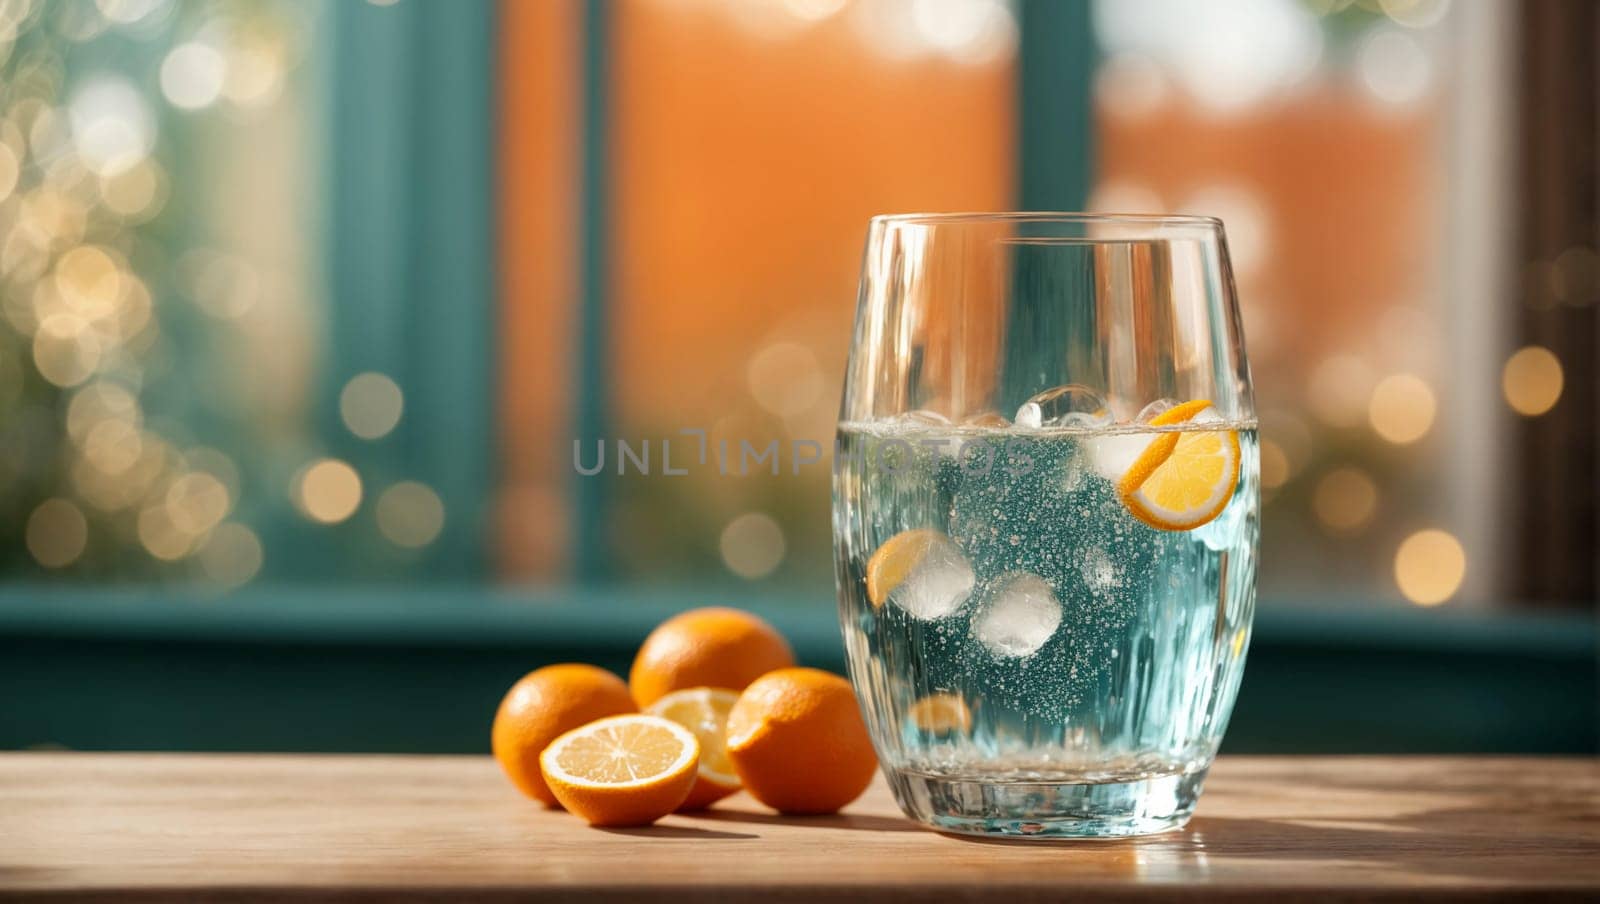 A beautiful transparent glass filled with a stream of fresh mineral water with ice, exploding with playful bubbles, sparkling on a wooden table.